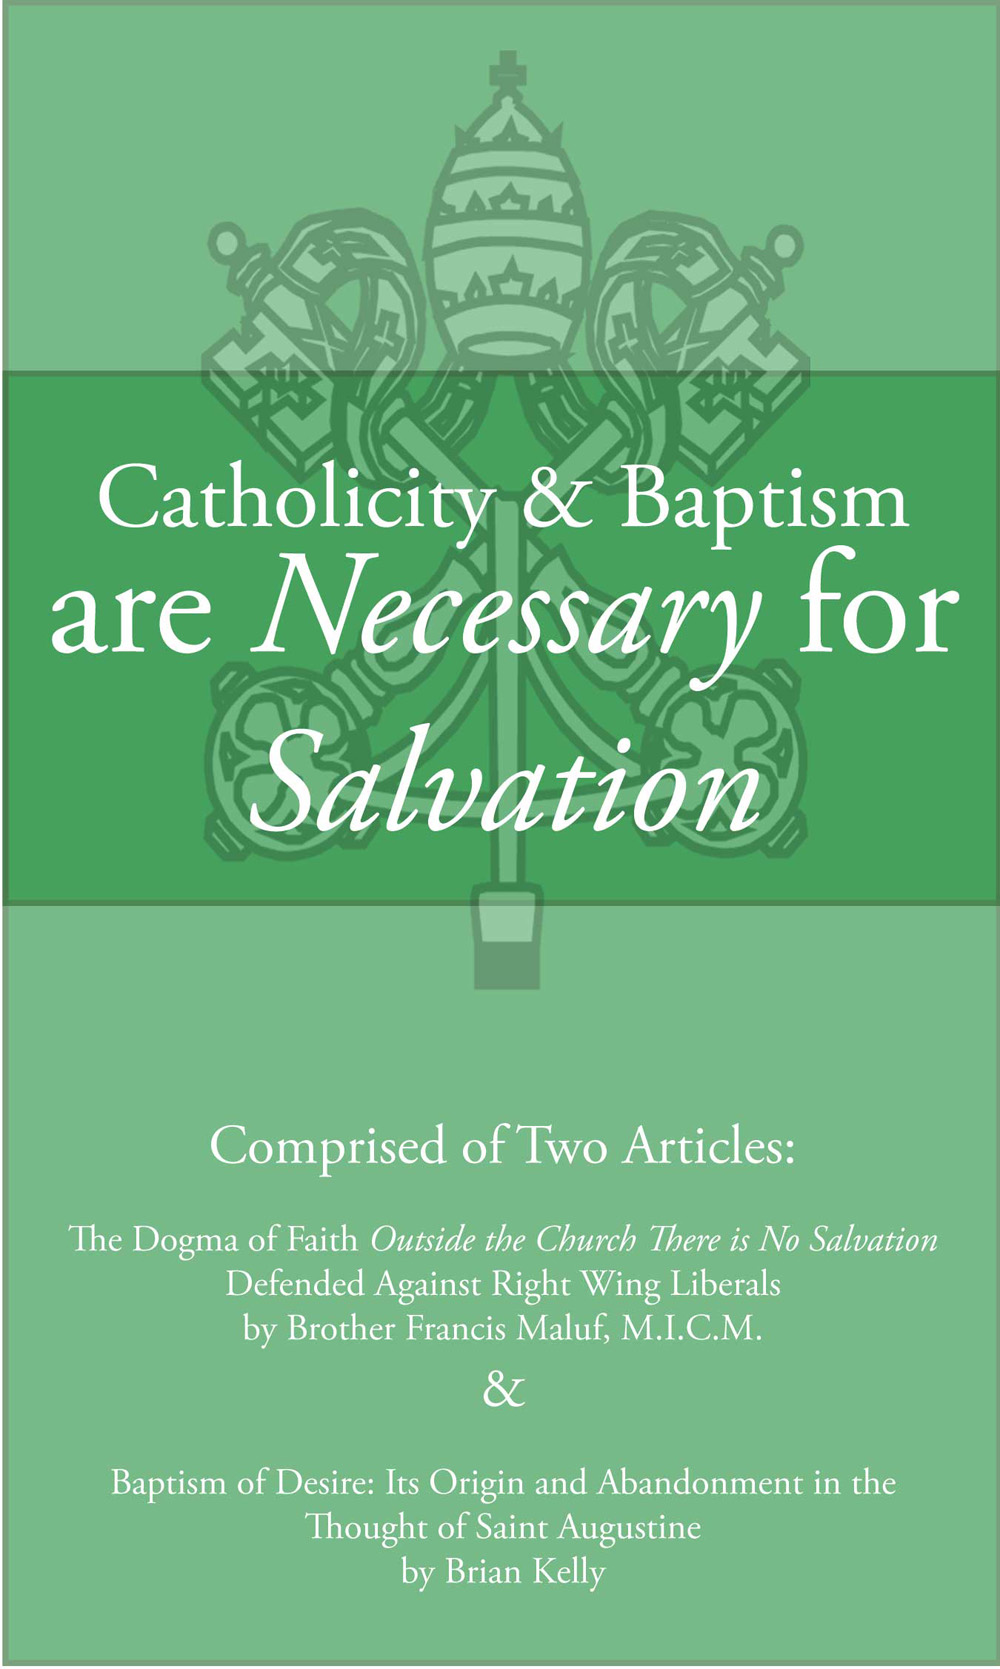 is the catholic church necessary for salvation